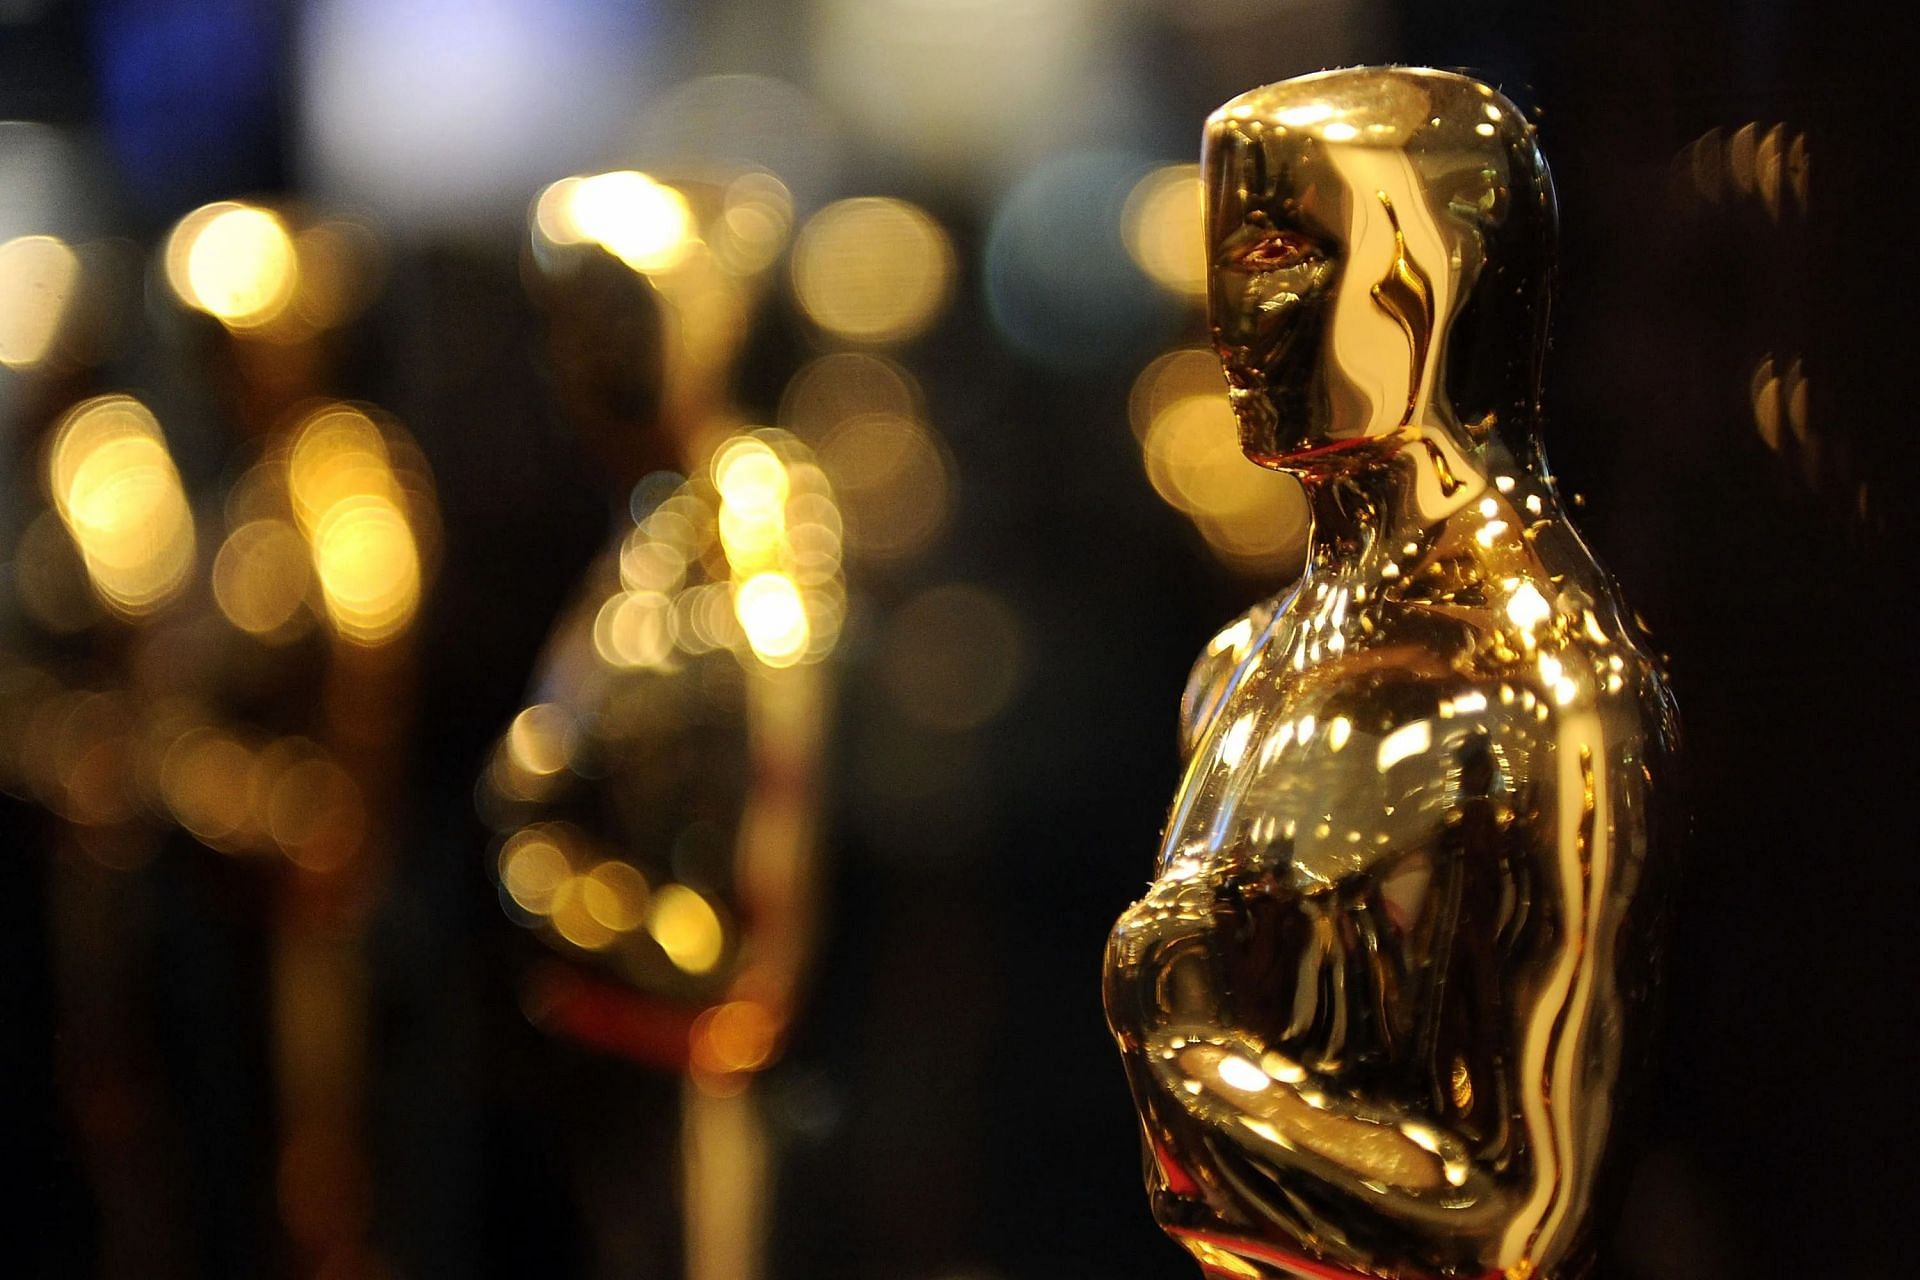 The Oscars award statue (Image via Getty Images/Andrew H. Walker)